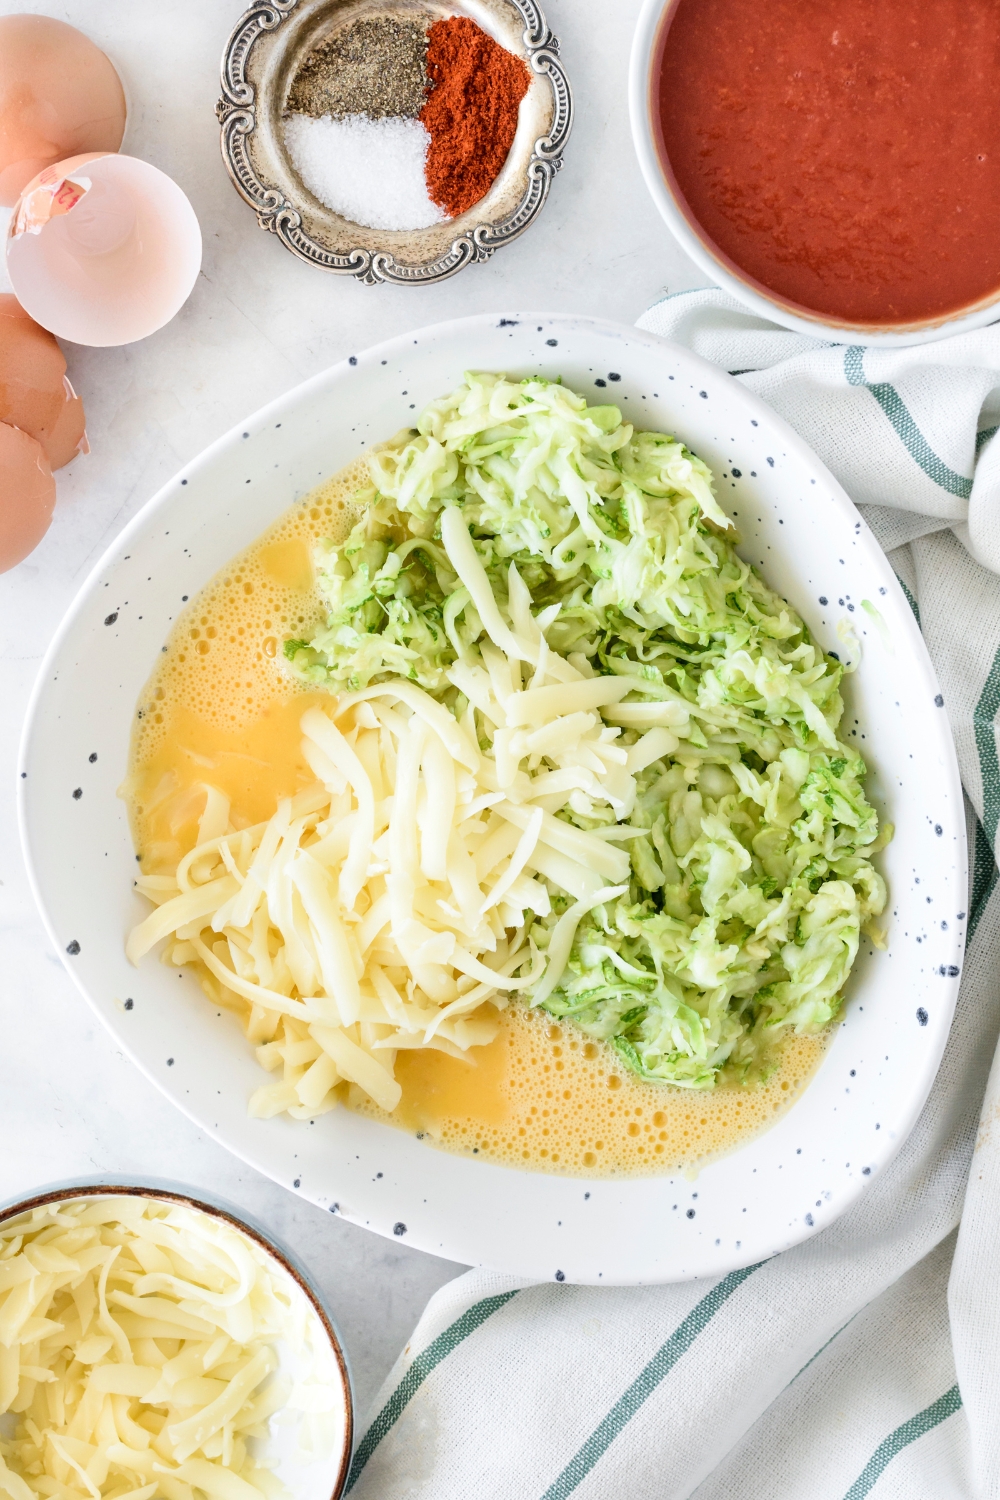 A bowl filled with grated zucchini, beaten eggs, and shredded cheese. The ingredients have not been combined.